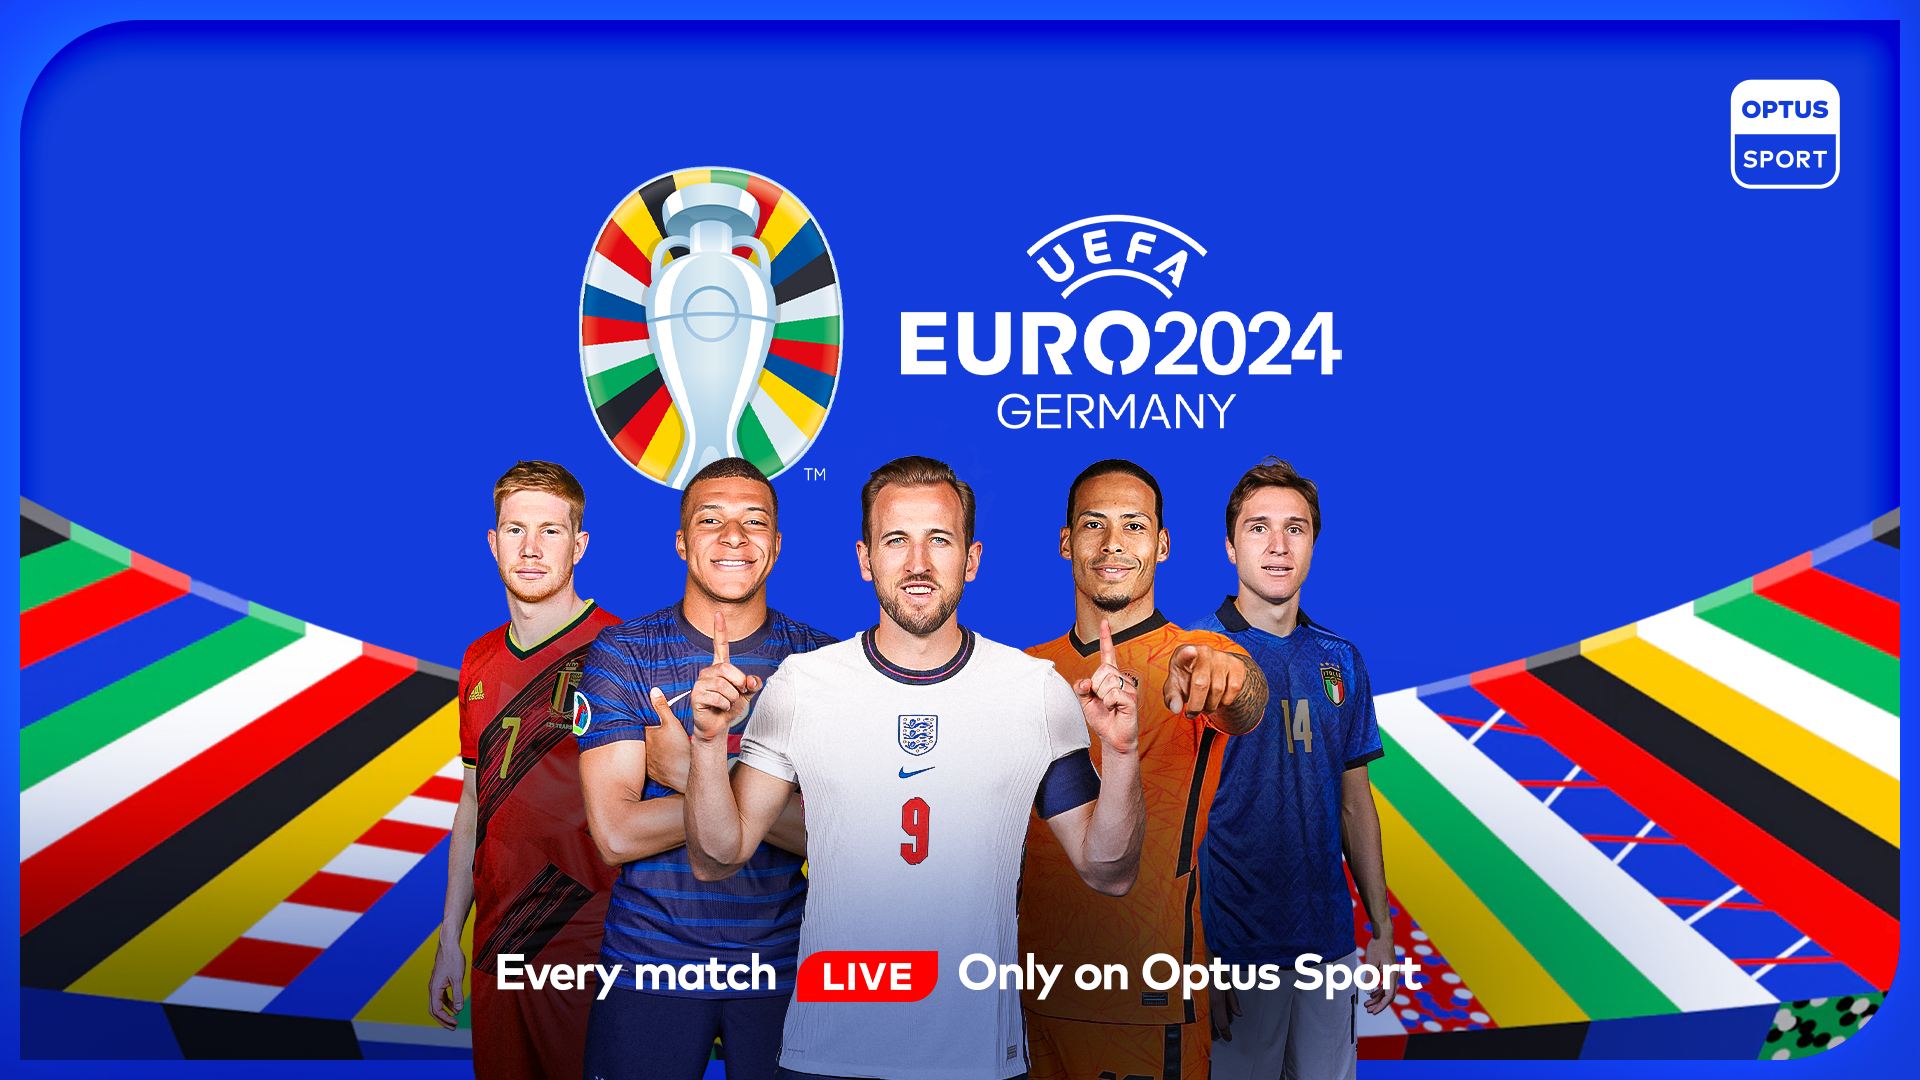 Optus Sport secures broadcast rights to UEFA EURO 2024